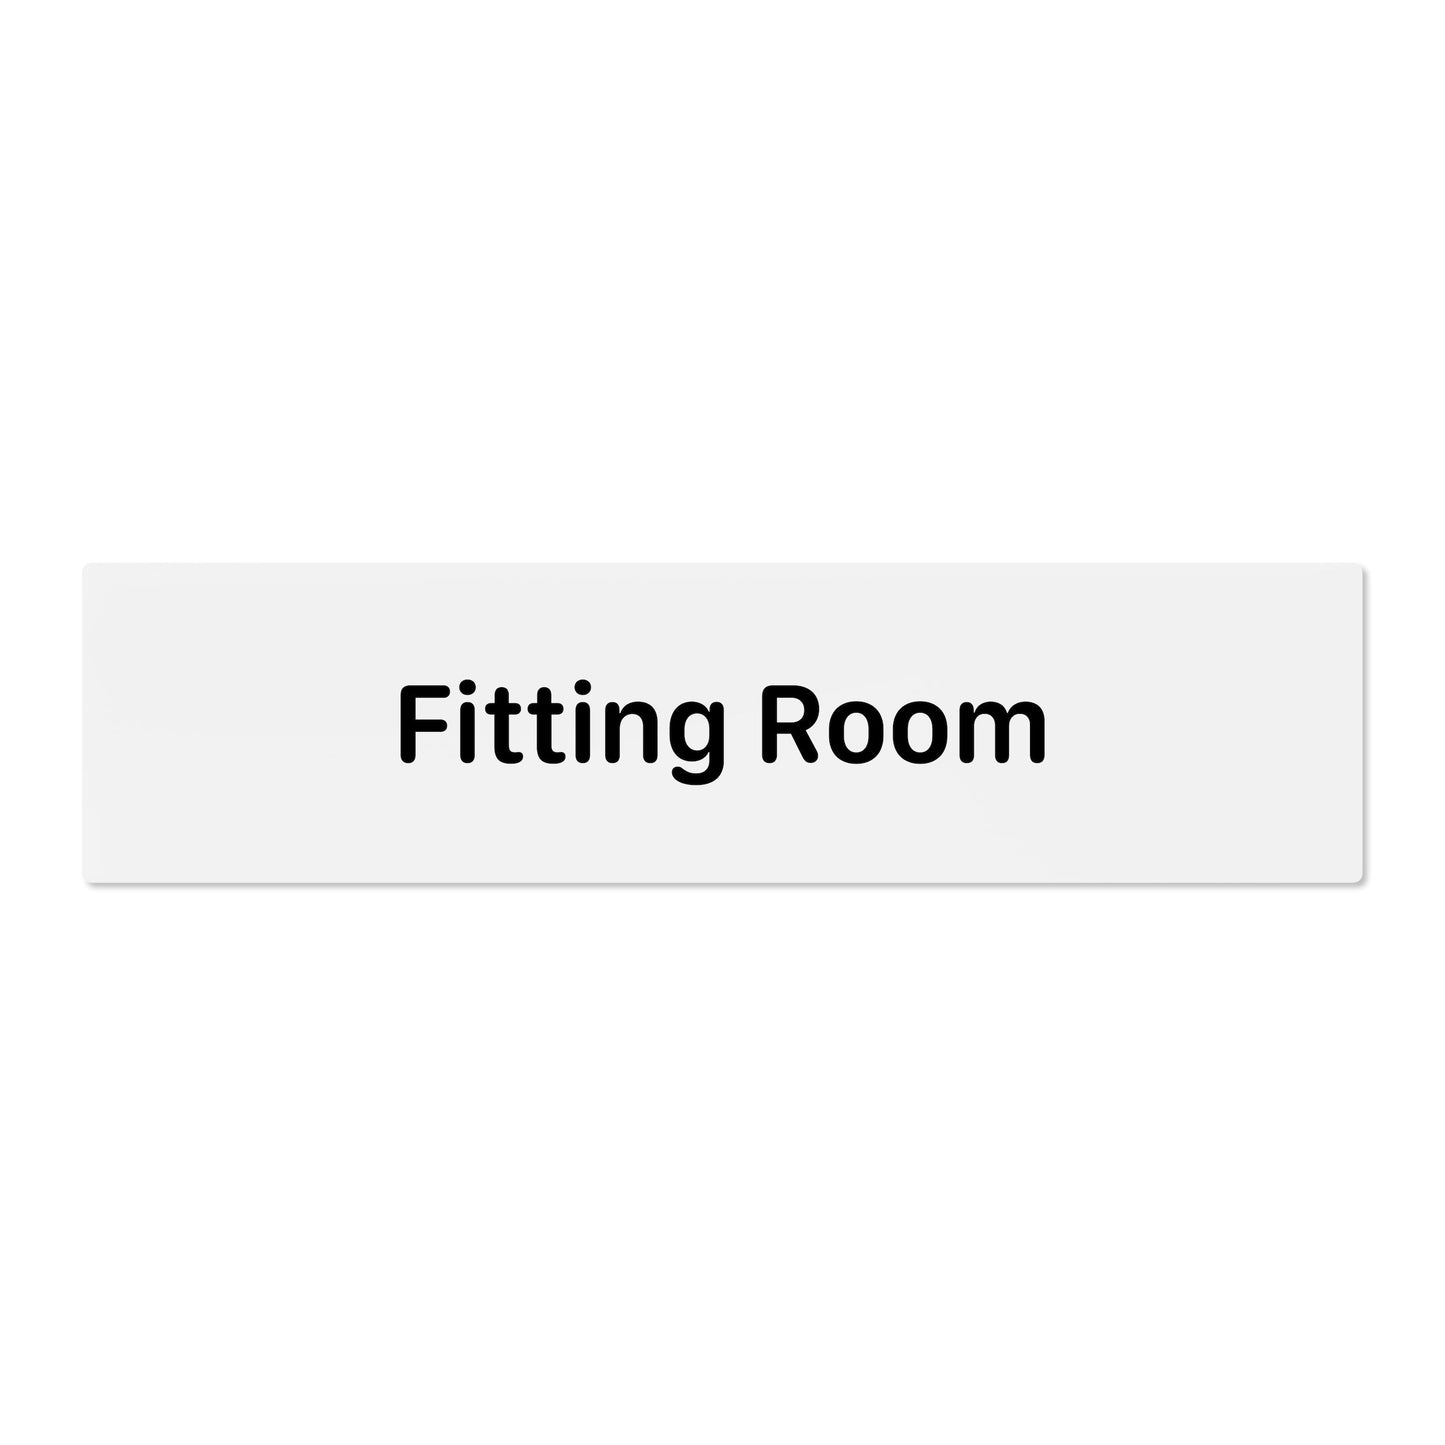 Fitting Room